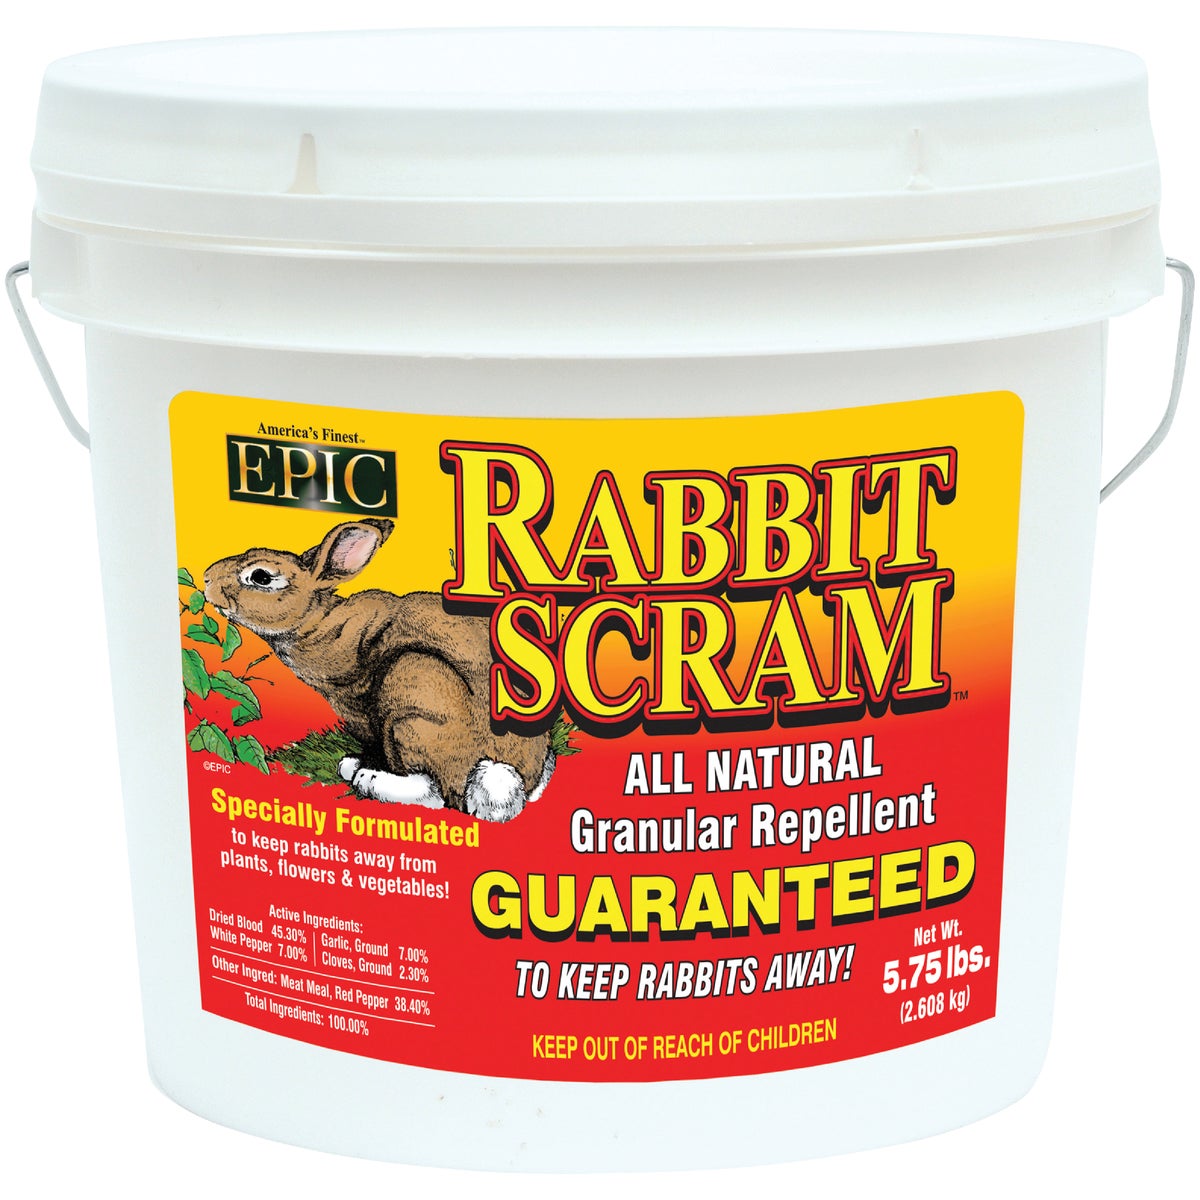 Item 702143, Specially formulated to keep rabbits away from vegetables and plants.